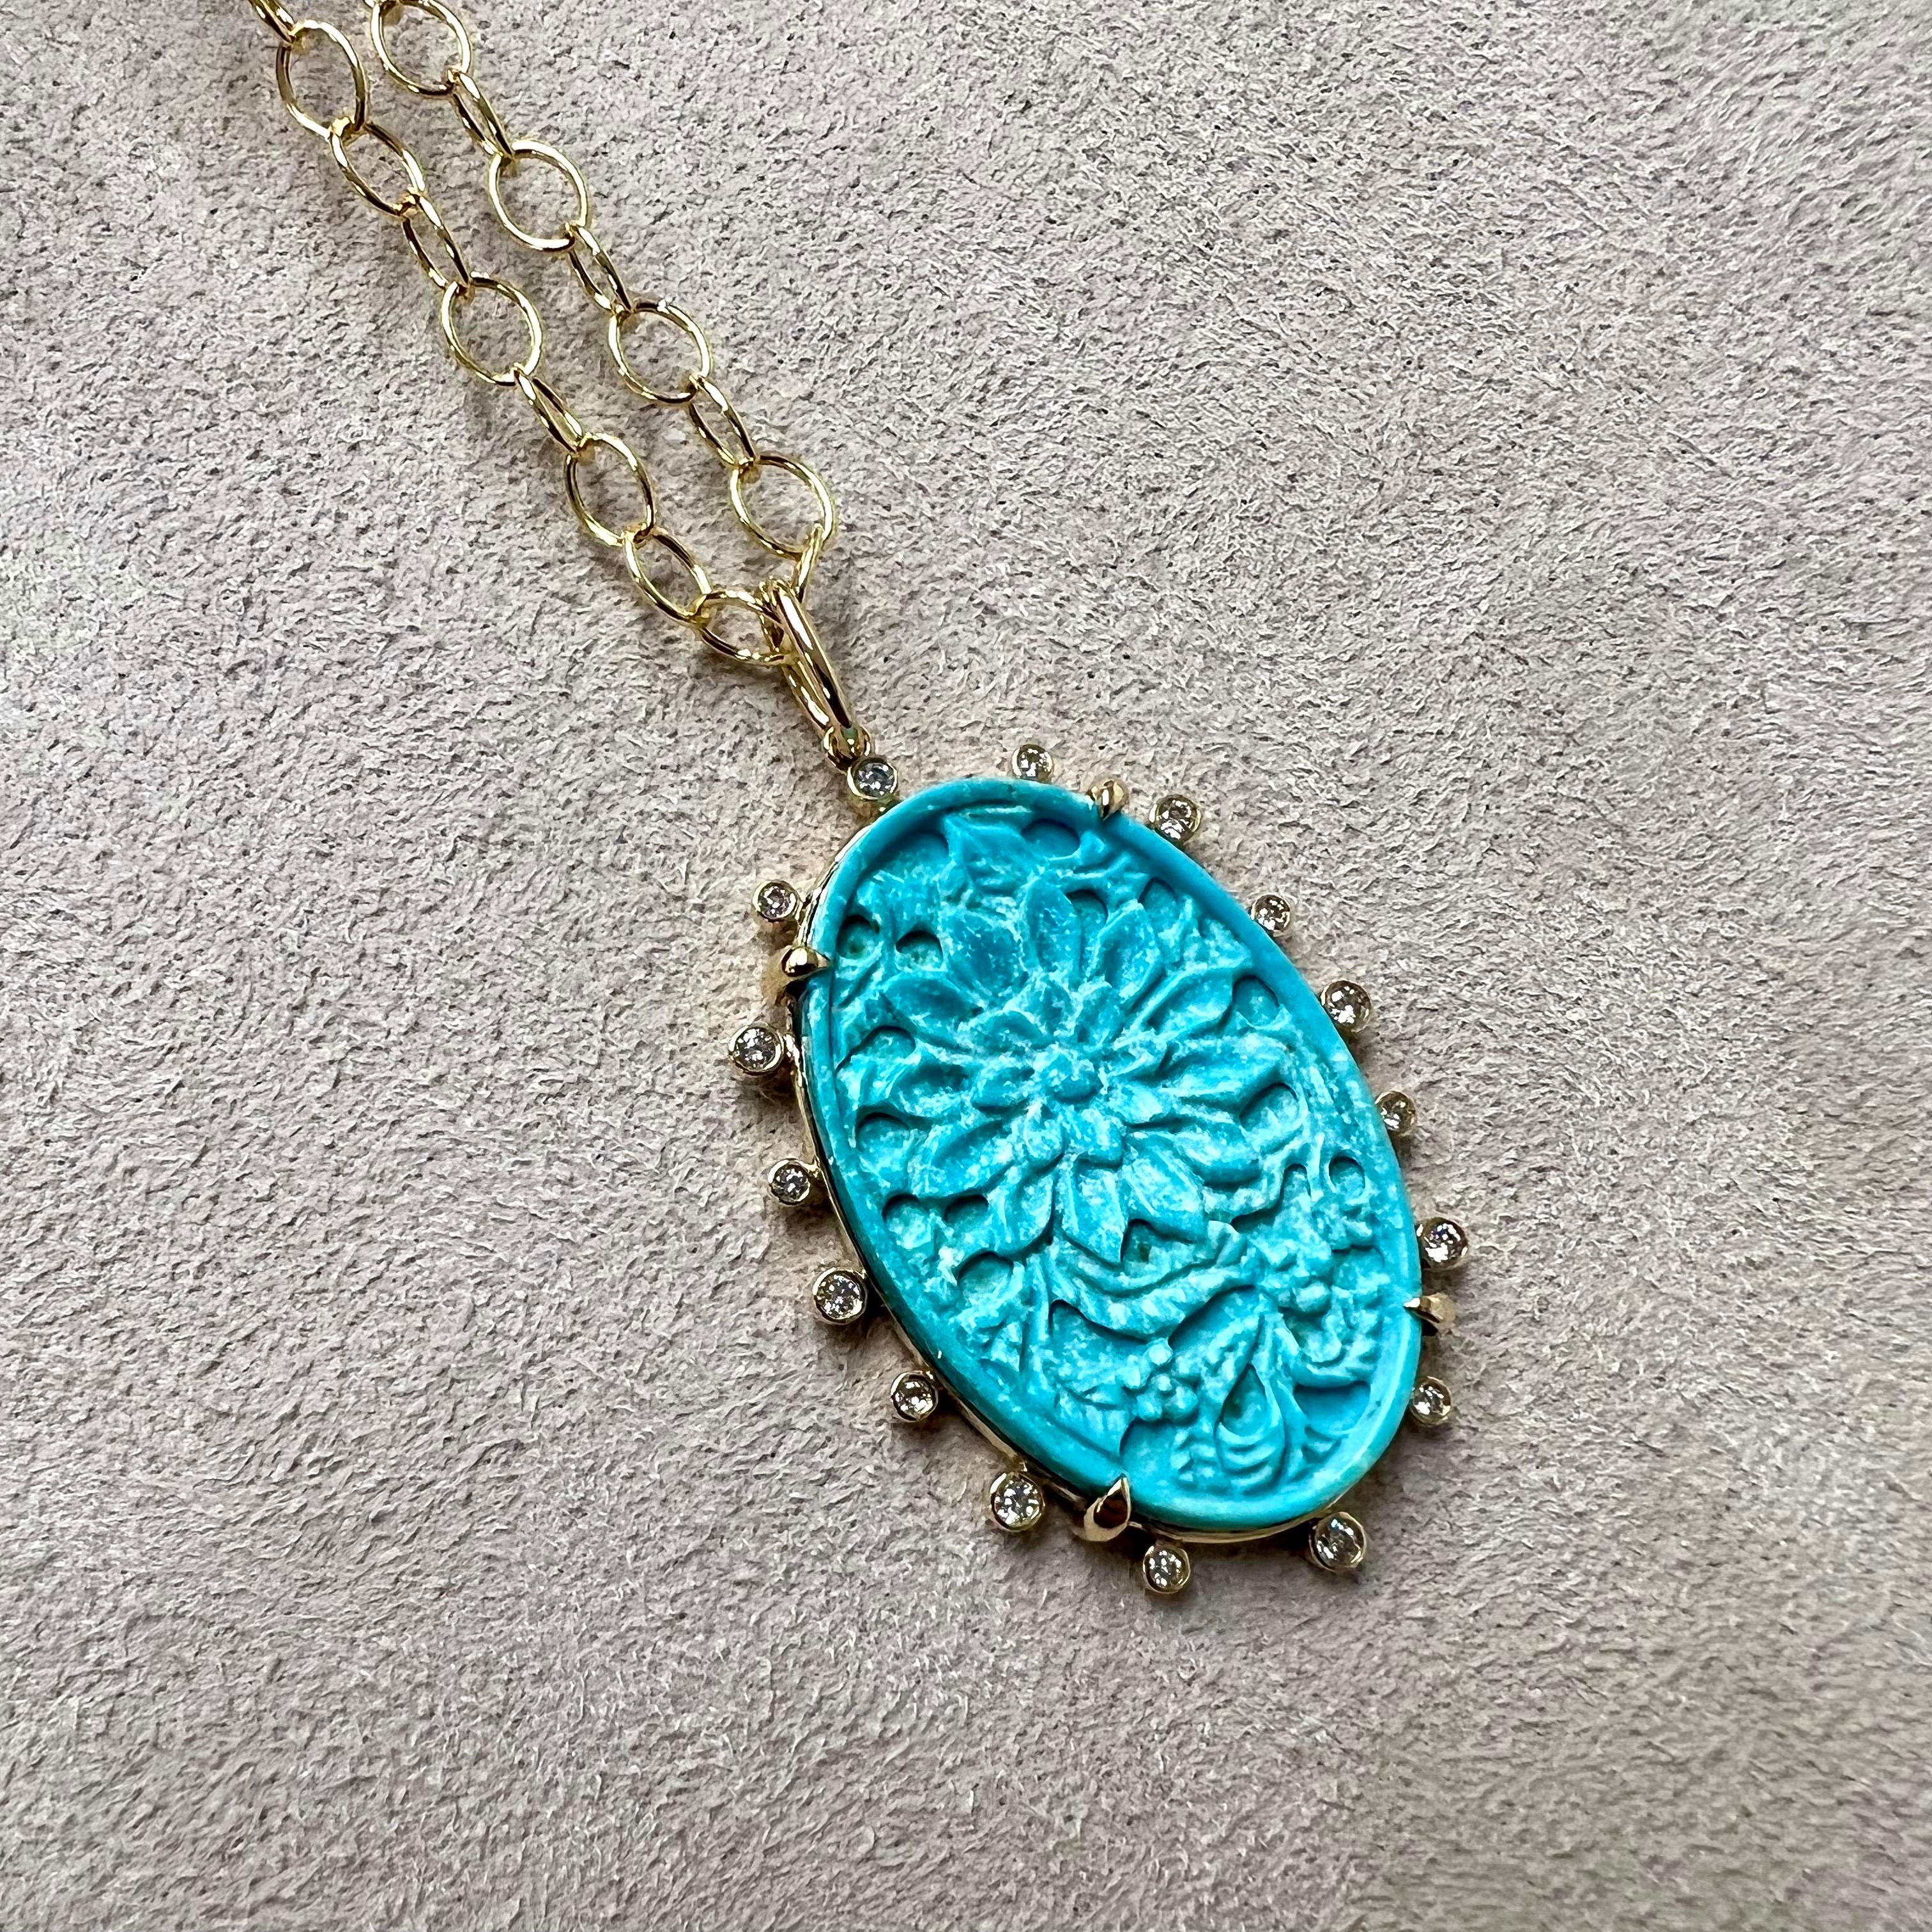 Created in 18 karat yellow gold
Turquoise 11 carats approx.
Diamonds 0.18 carat approx.
Chain sold separately

Formed in 18-karat golden yellow, Turquoise 11 carats approx., and Diamonds 0.18 carats approx., this pendant is an exquisite addition to